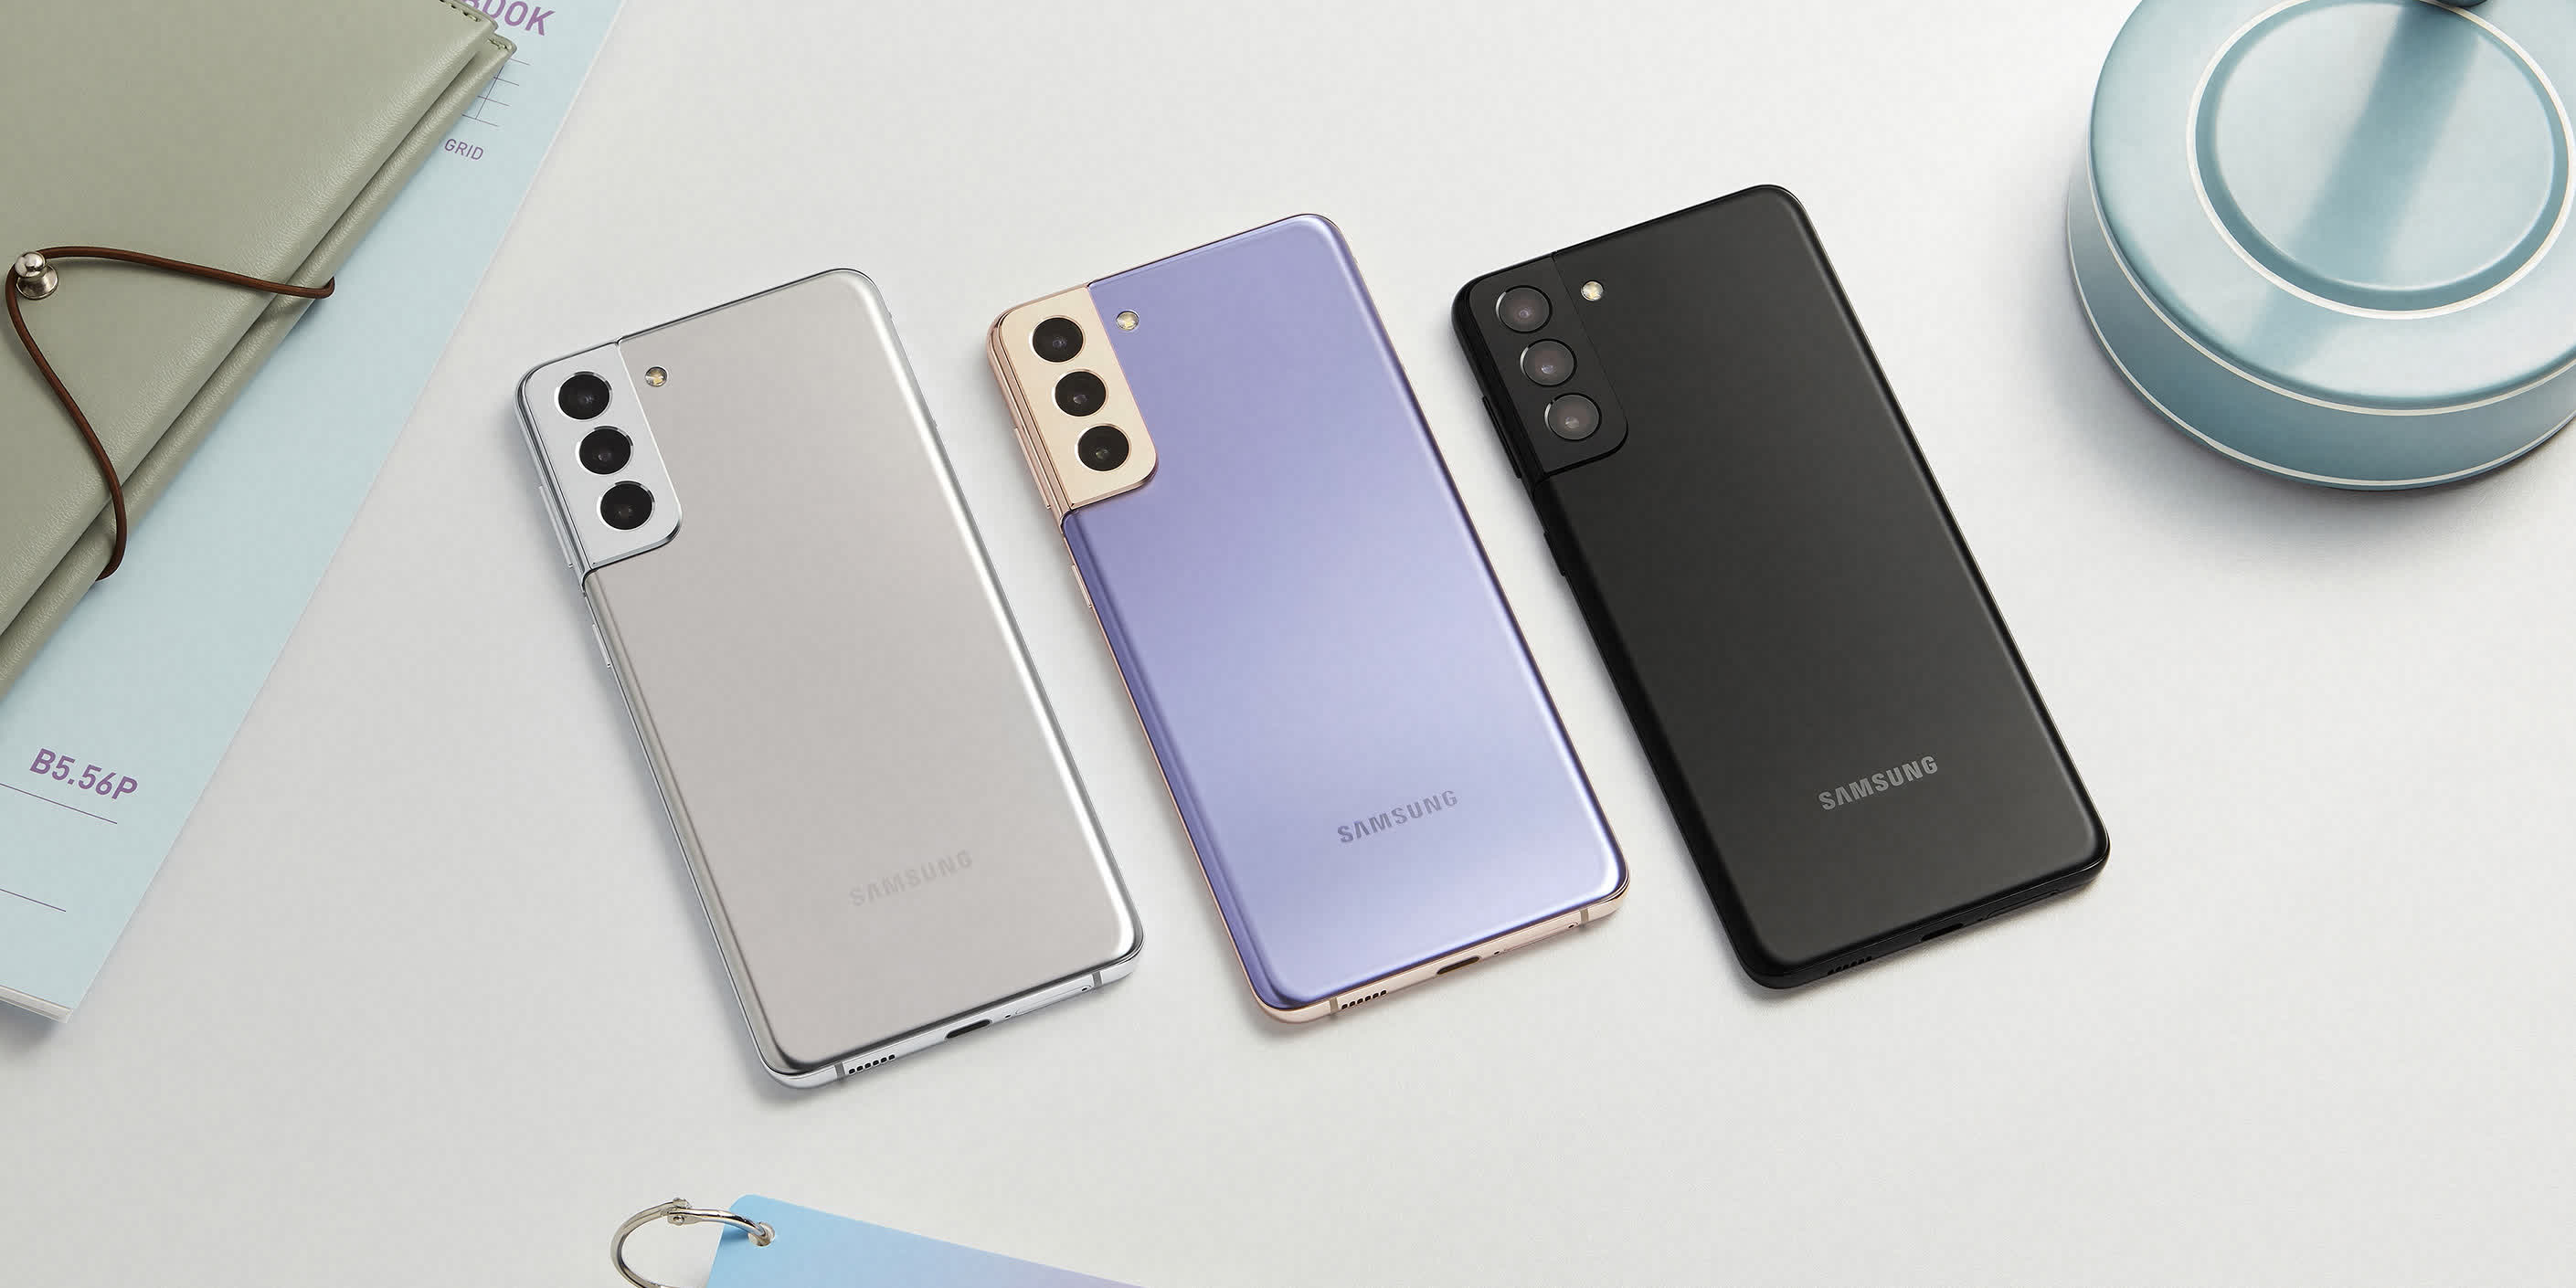 Samsung sold the most smartphones in Europe last year, followed by Apple and Xiaomi